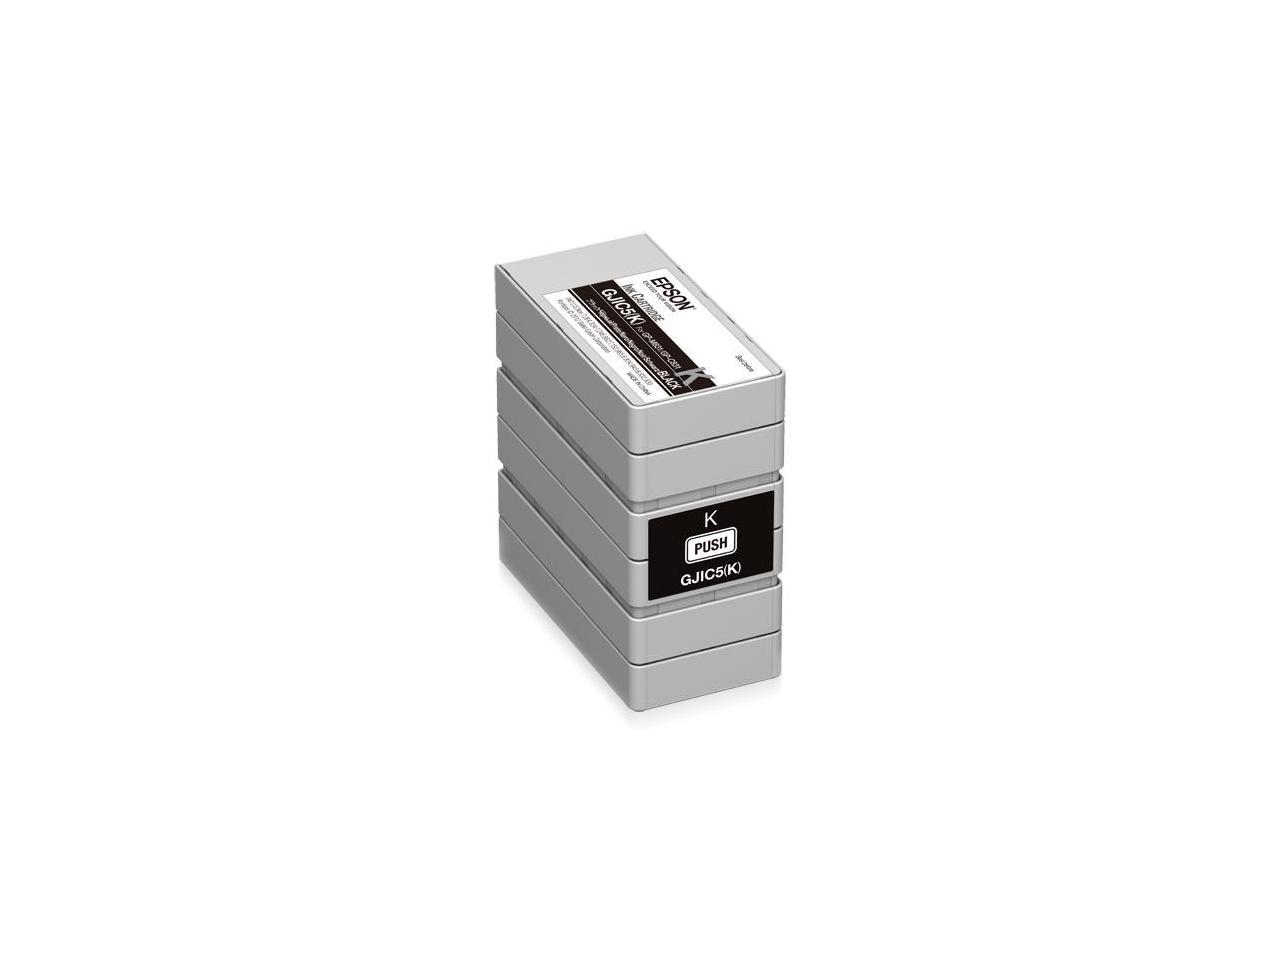 EPSON C13S020563 CONSUMABLES BLACK CJIC5(K) INKJET CARTRIDGE RESTRICTED TO COLORWORKS PARTNERS ONLY COLORWORKS C831 COMPATIBLE PRICED PER CARTRIDGE